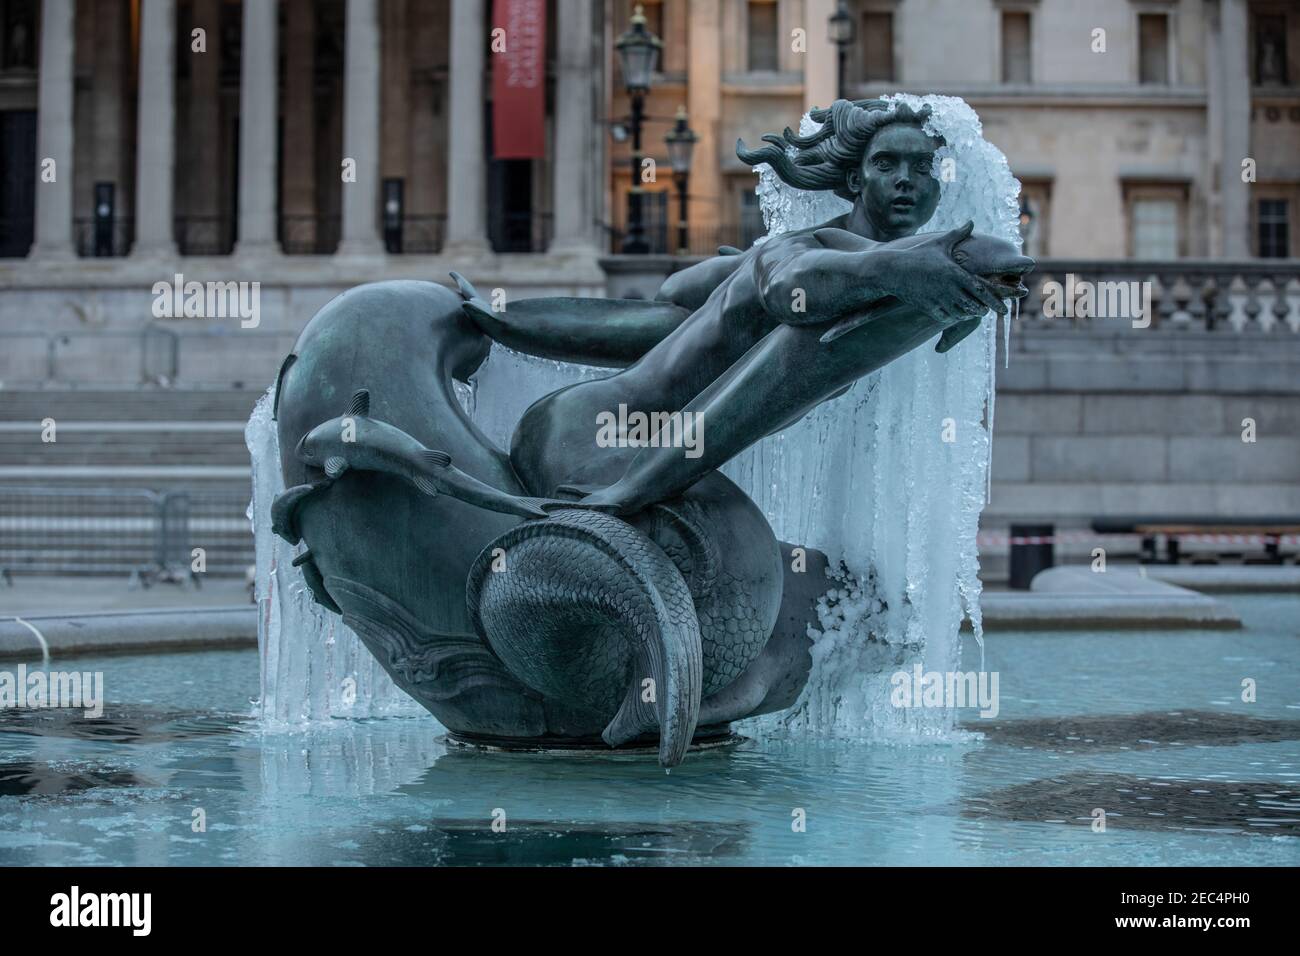 Frozen statue in Trafalgar Square in the foreground of National Gallery after temperatures hit sub-zero temperatures in London during February 2021. Stock Photo